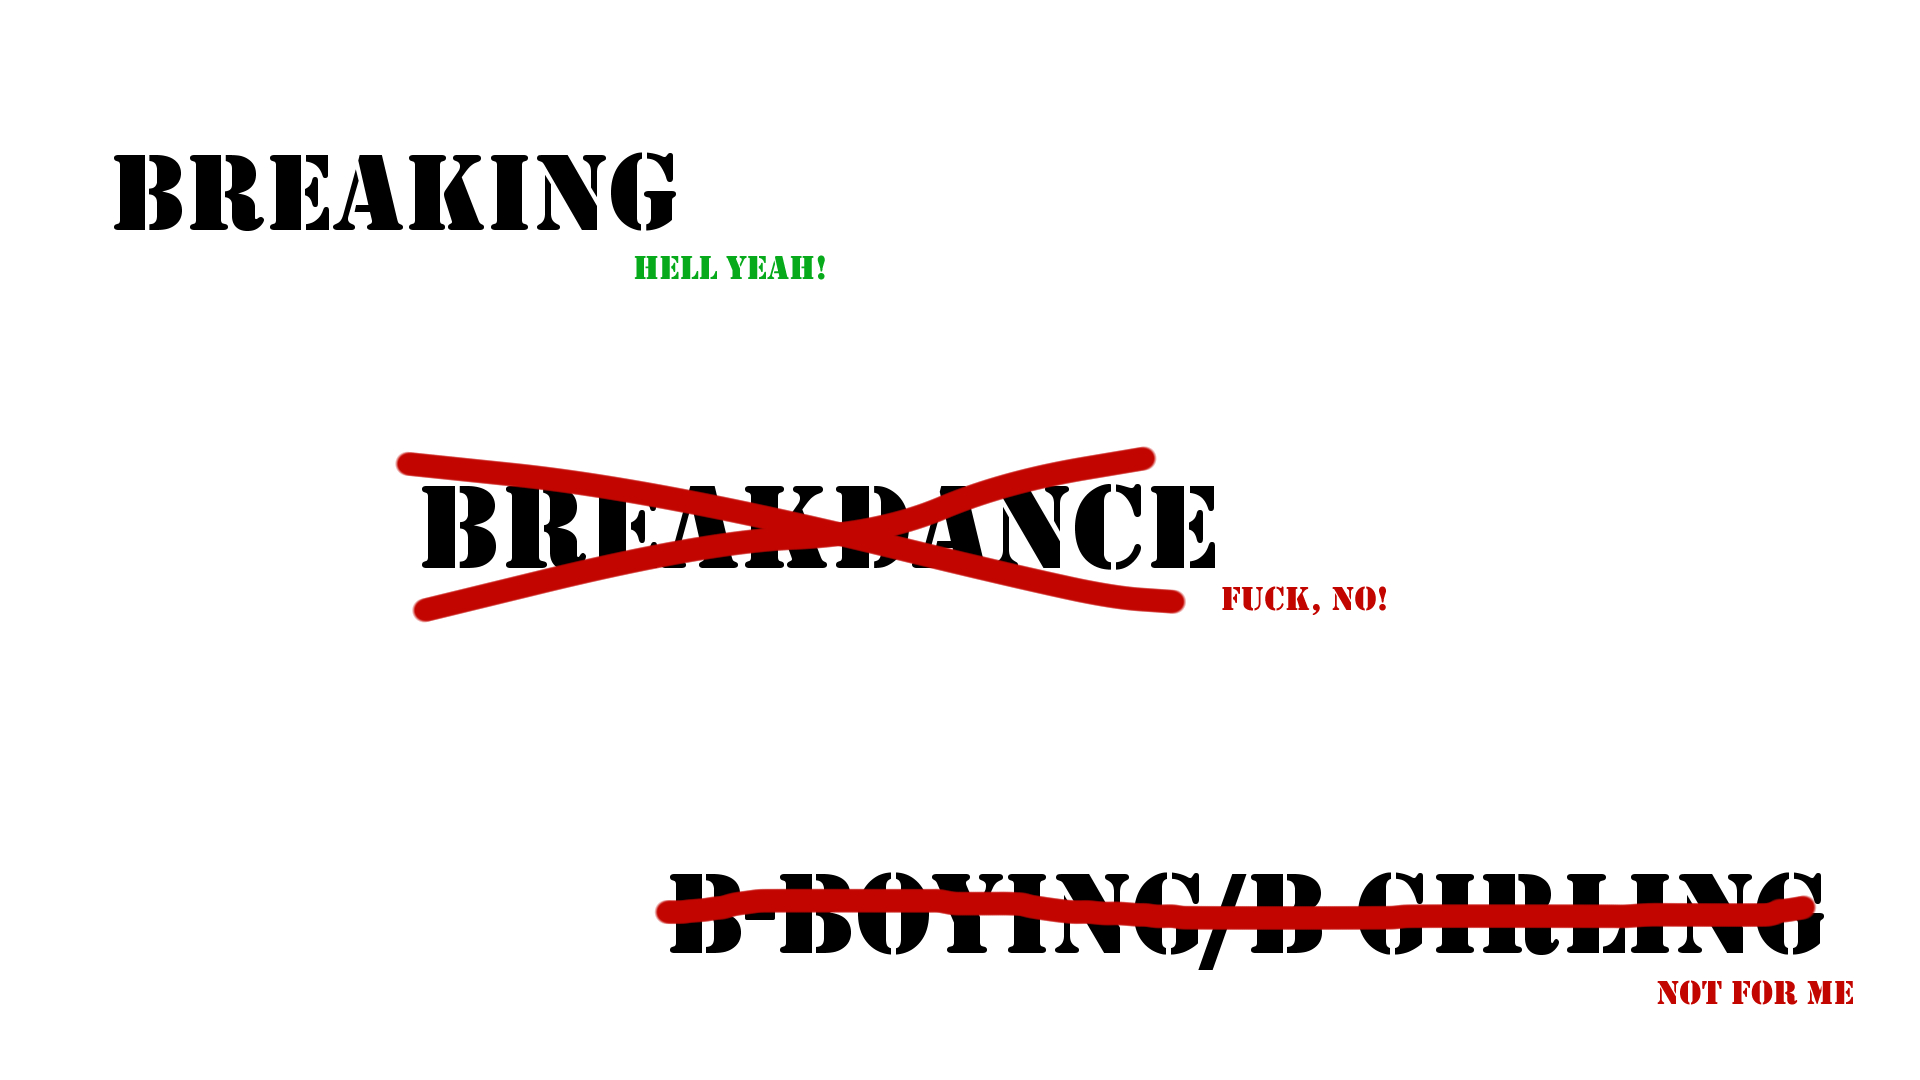 Illustration with Breakdance and B-Boying/B-Girking crossed out